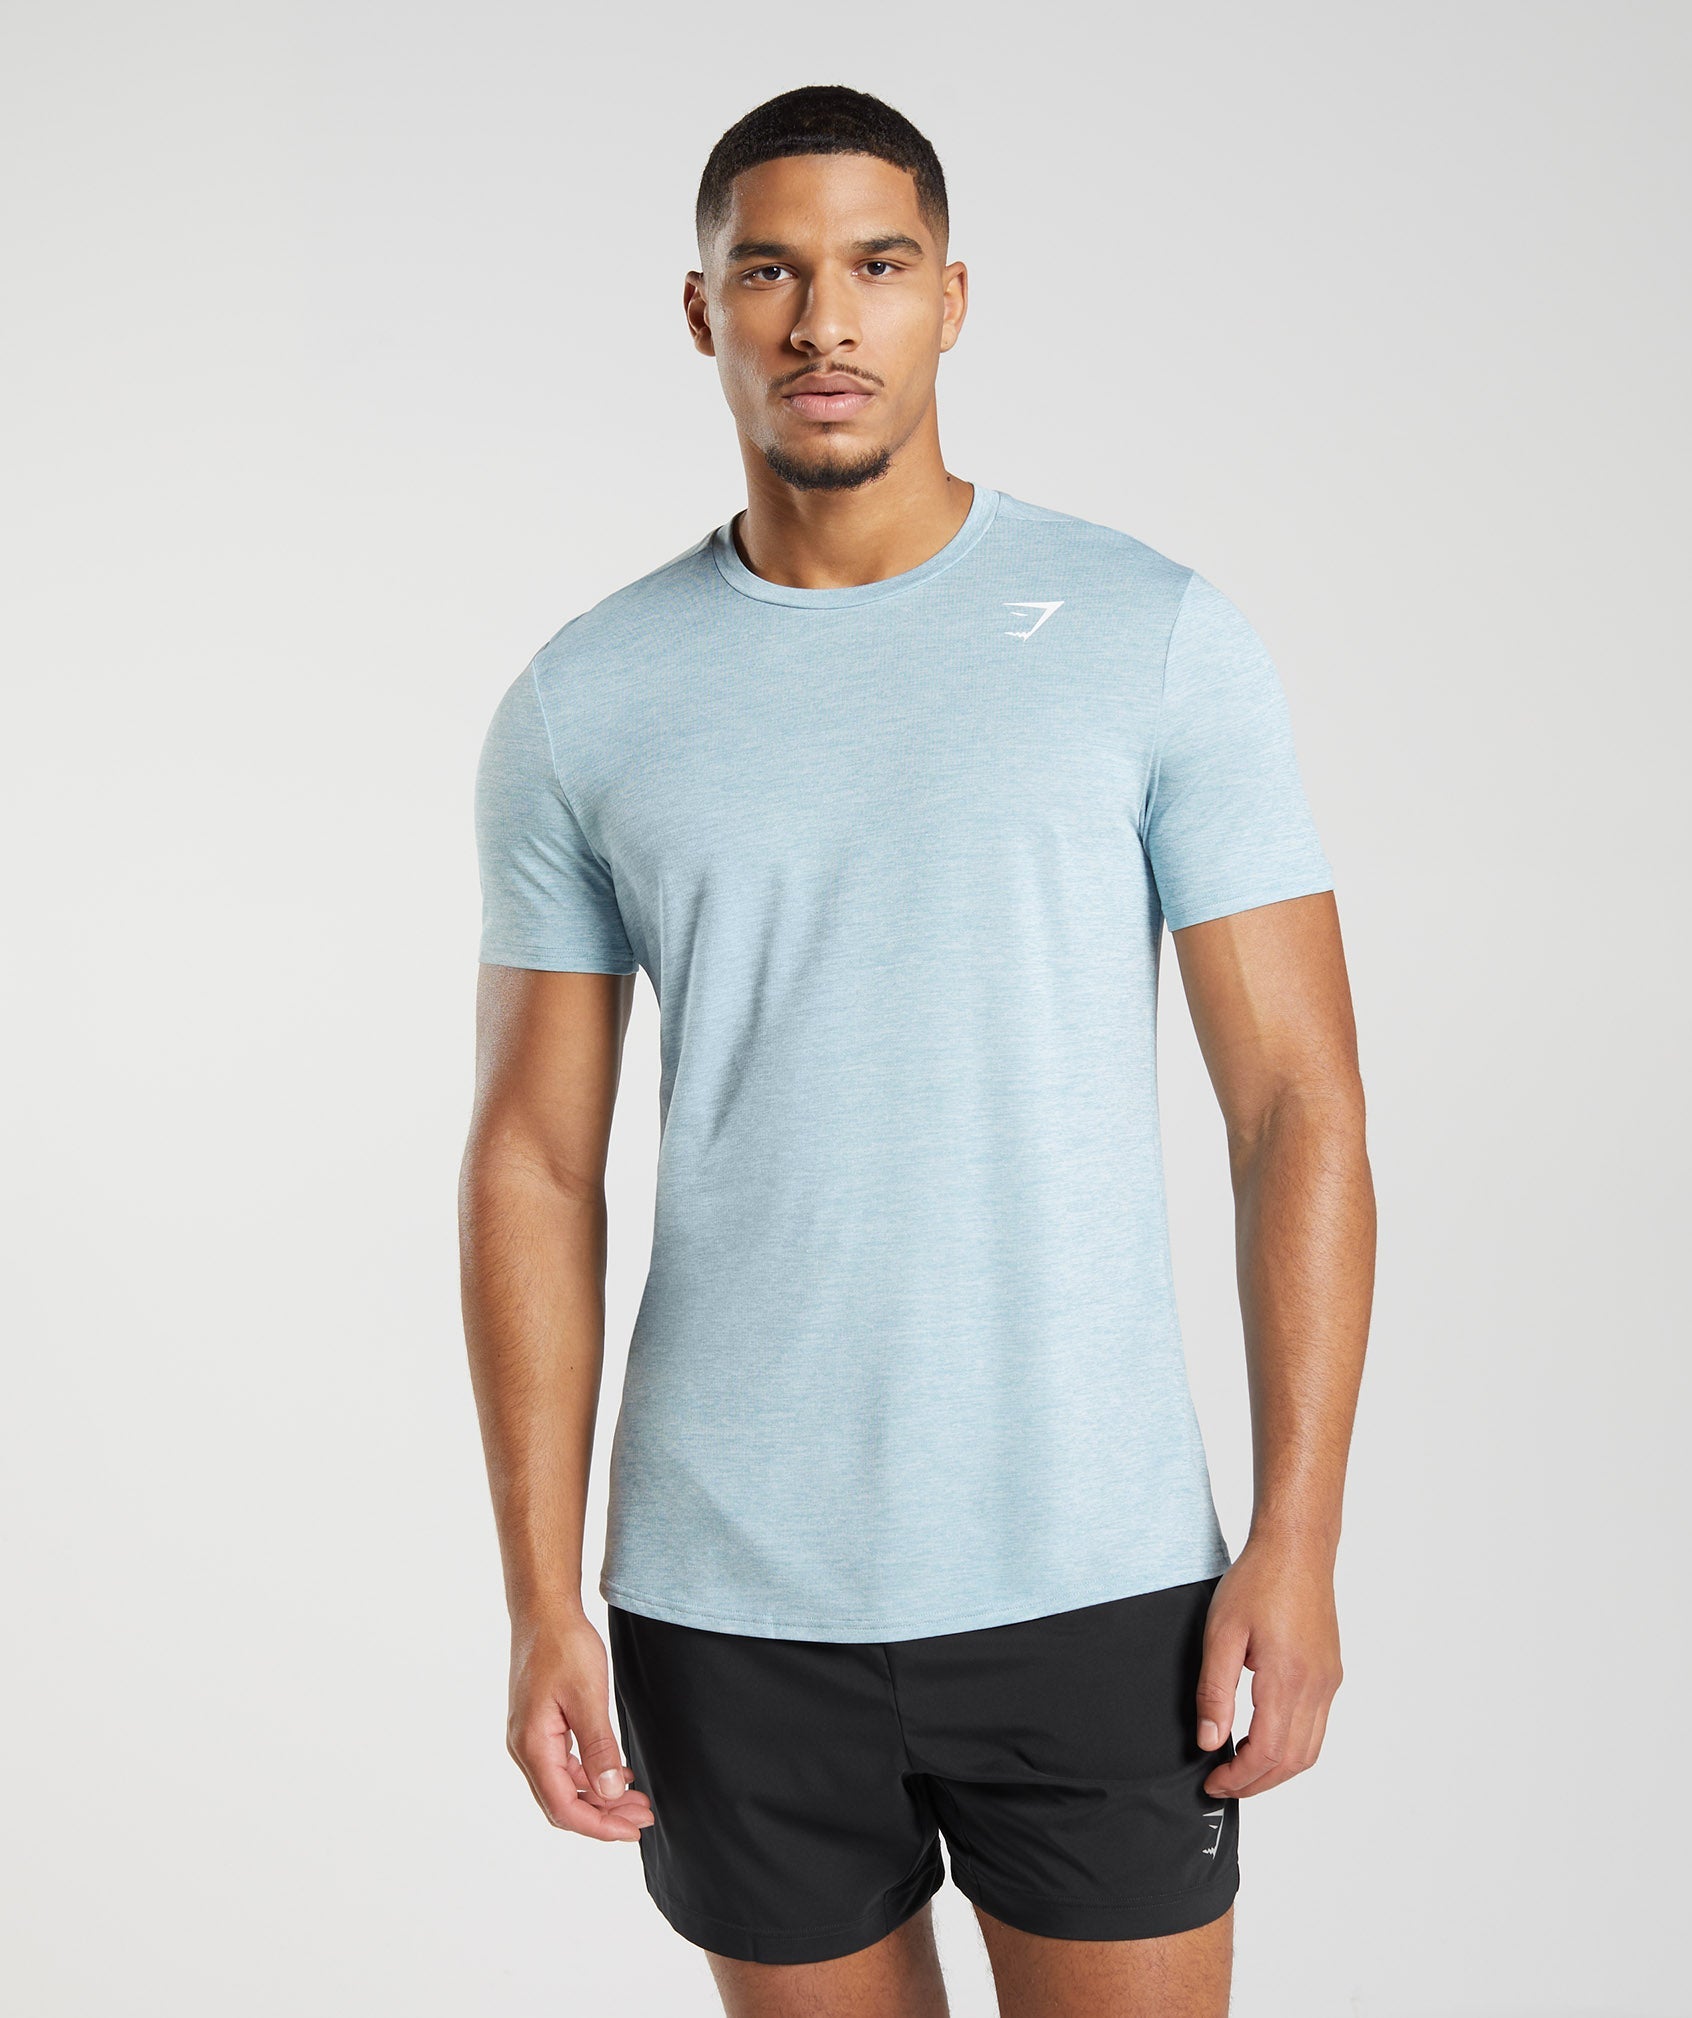 Arrival T-Shirt in Iceberg Blue/Icy Blue Marl - view 1